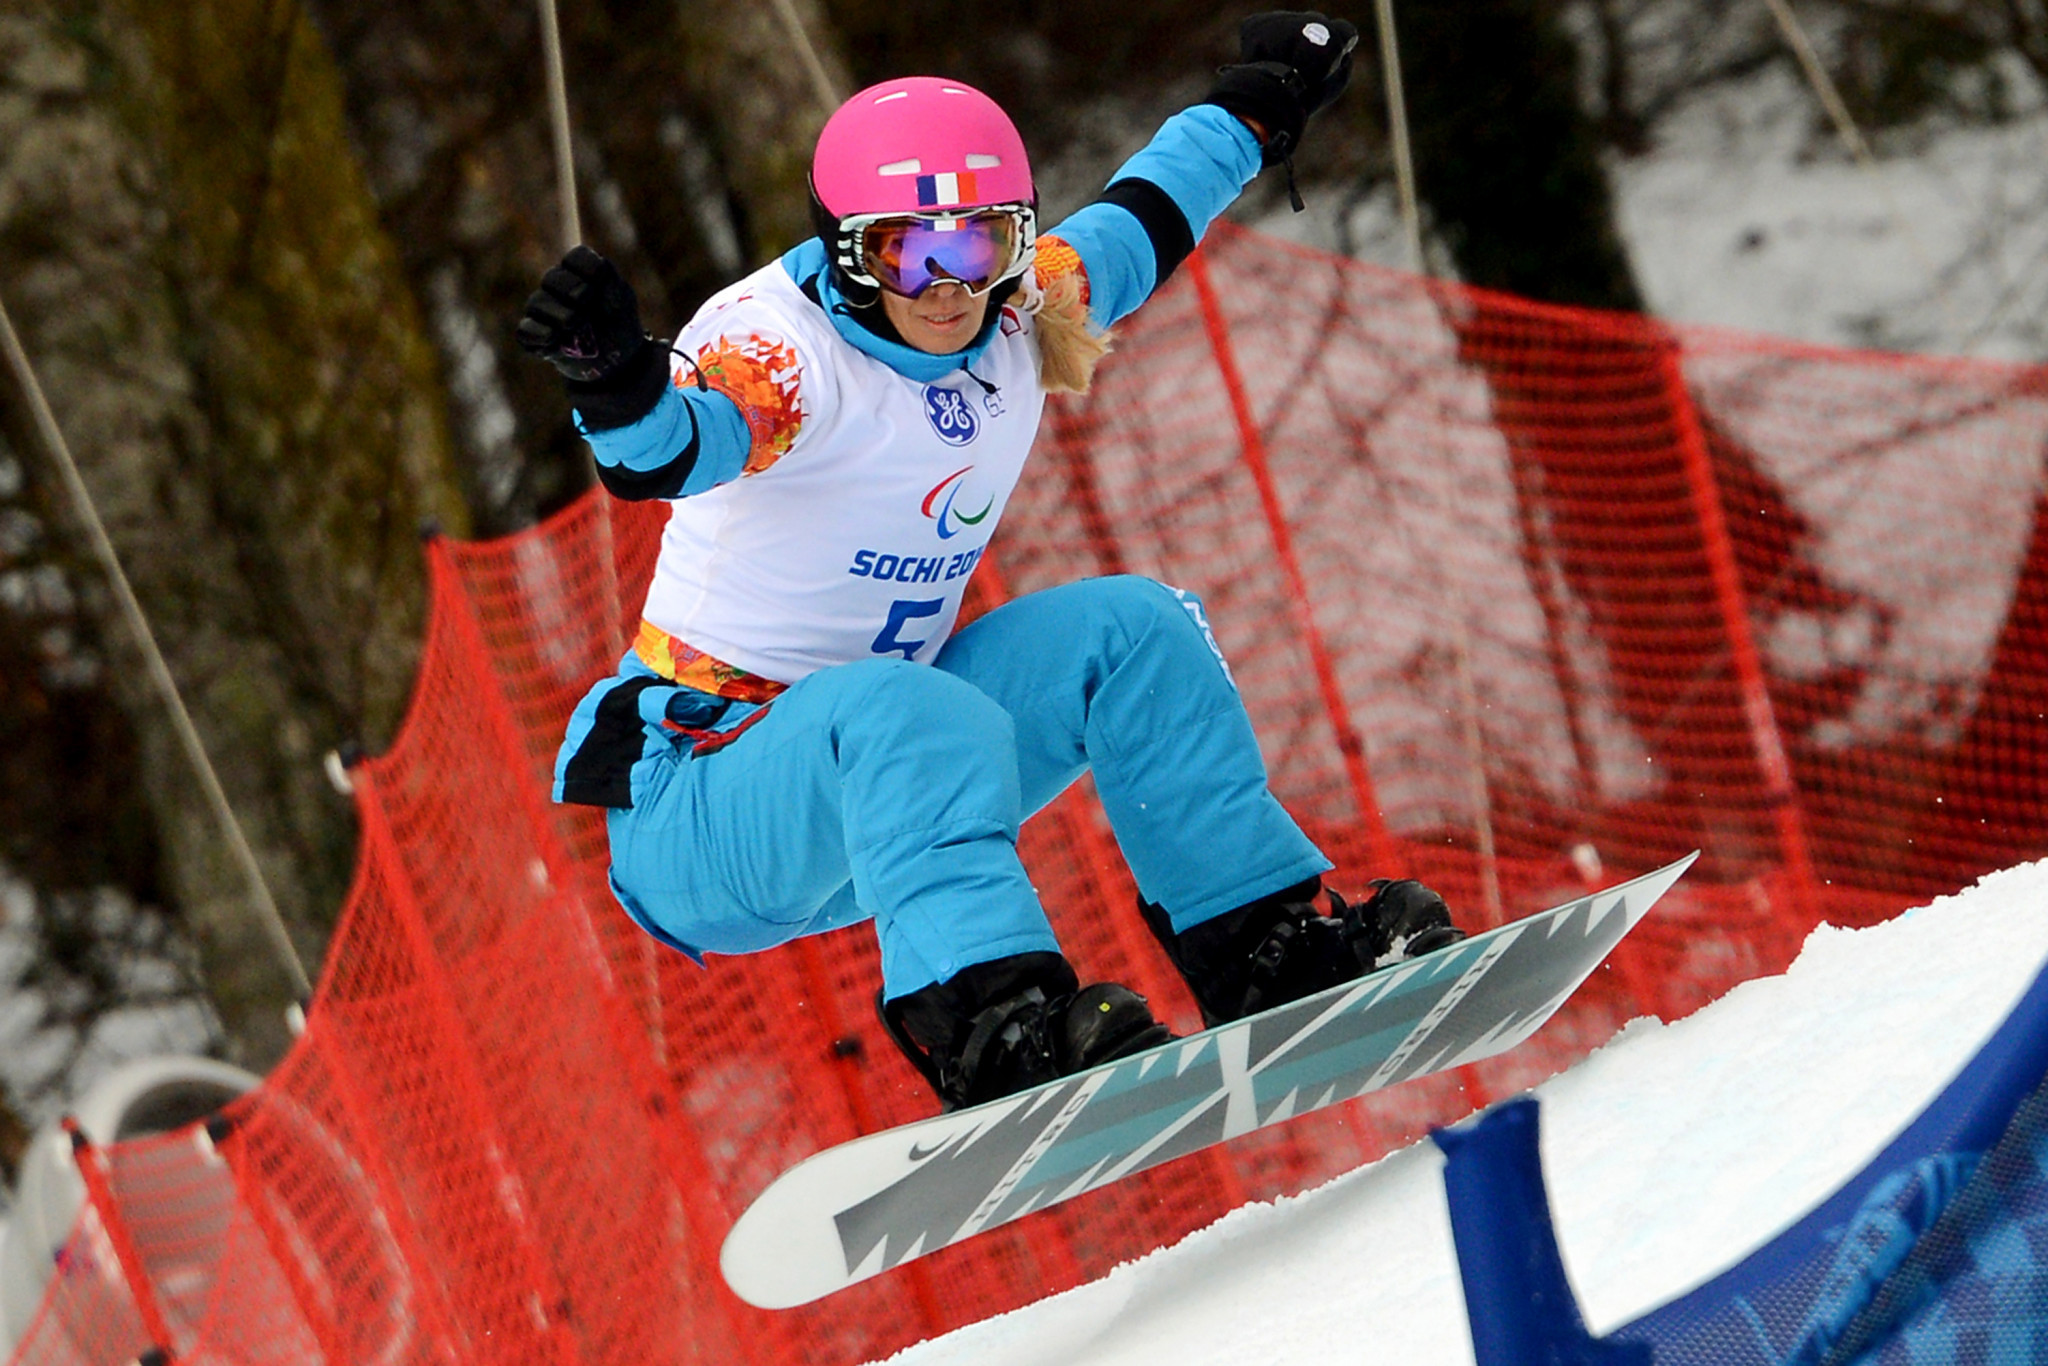 Cécile Hernandez will hope to improve on her silver medal from Sochi 2014 ©Getty Images